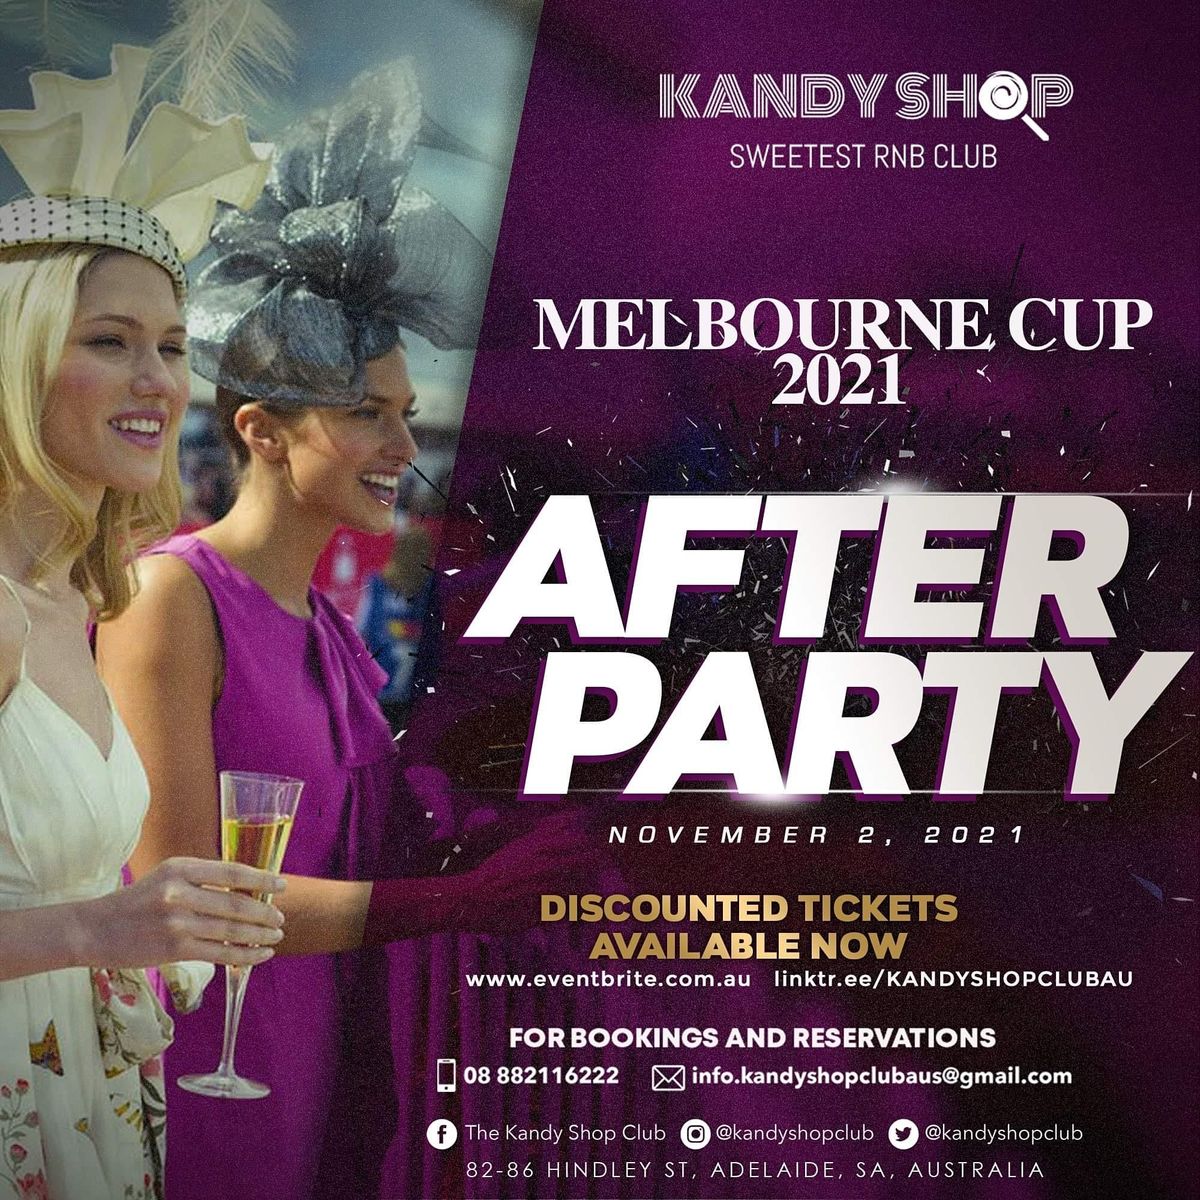 MELBOURNE CUP 2021 AFTER PARTY